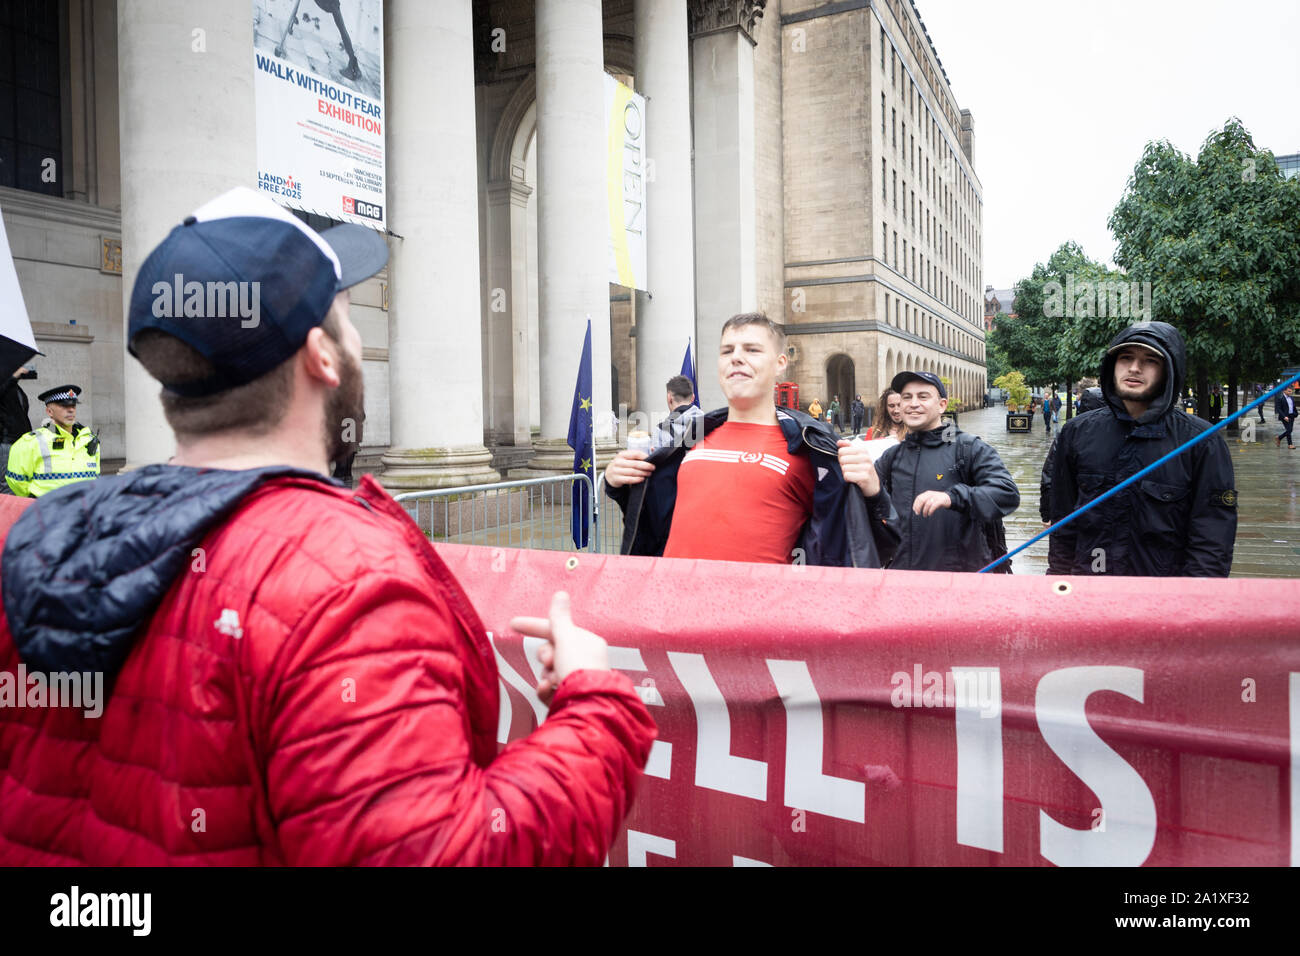 Manchester, UK. 29 September, 2019. Pro-Brexit demonstrators clashed with anti-fashists outside the Conservative Party Conference. Andy Barton/Alamy Live News Stock Photo